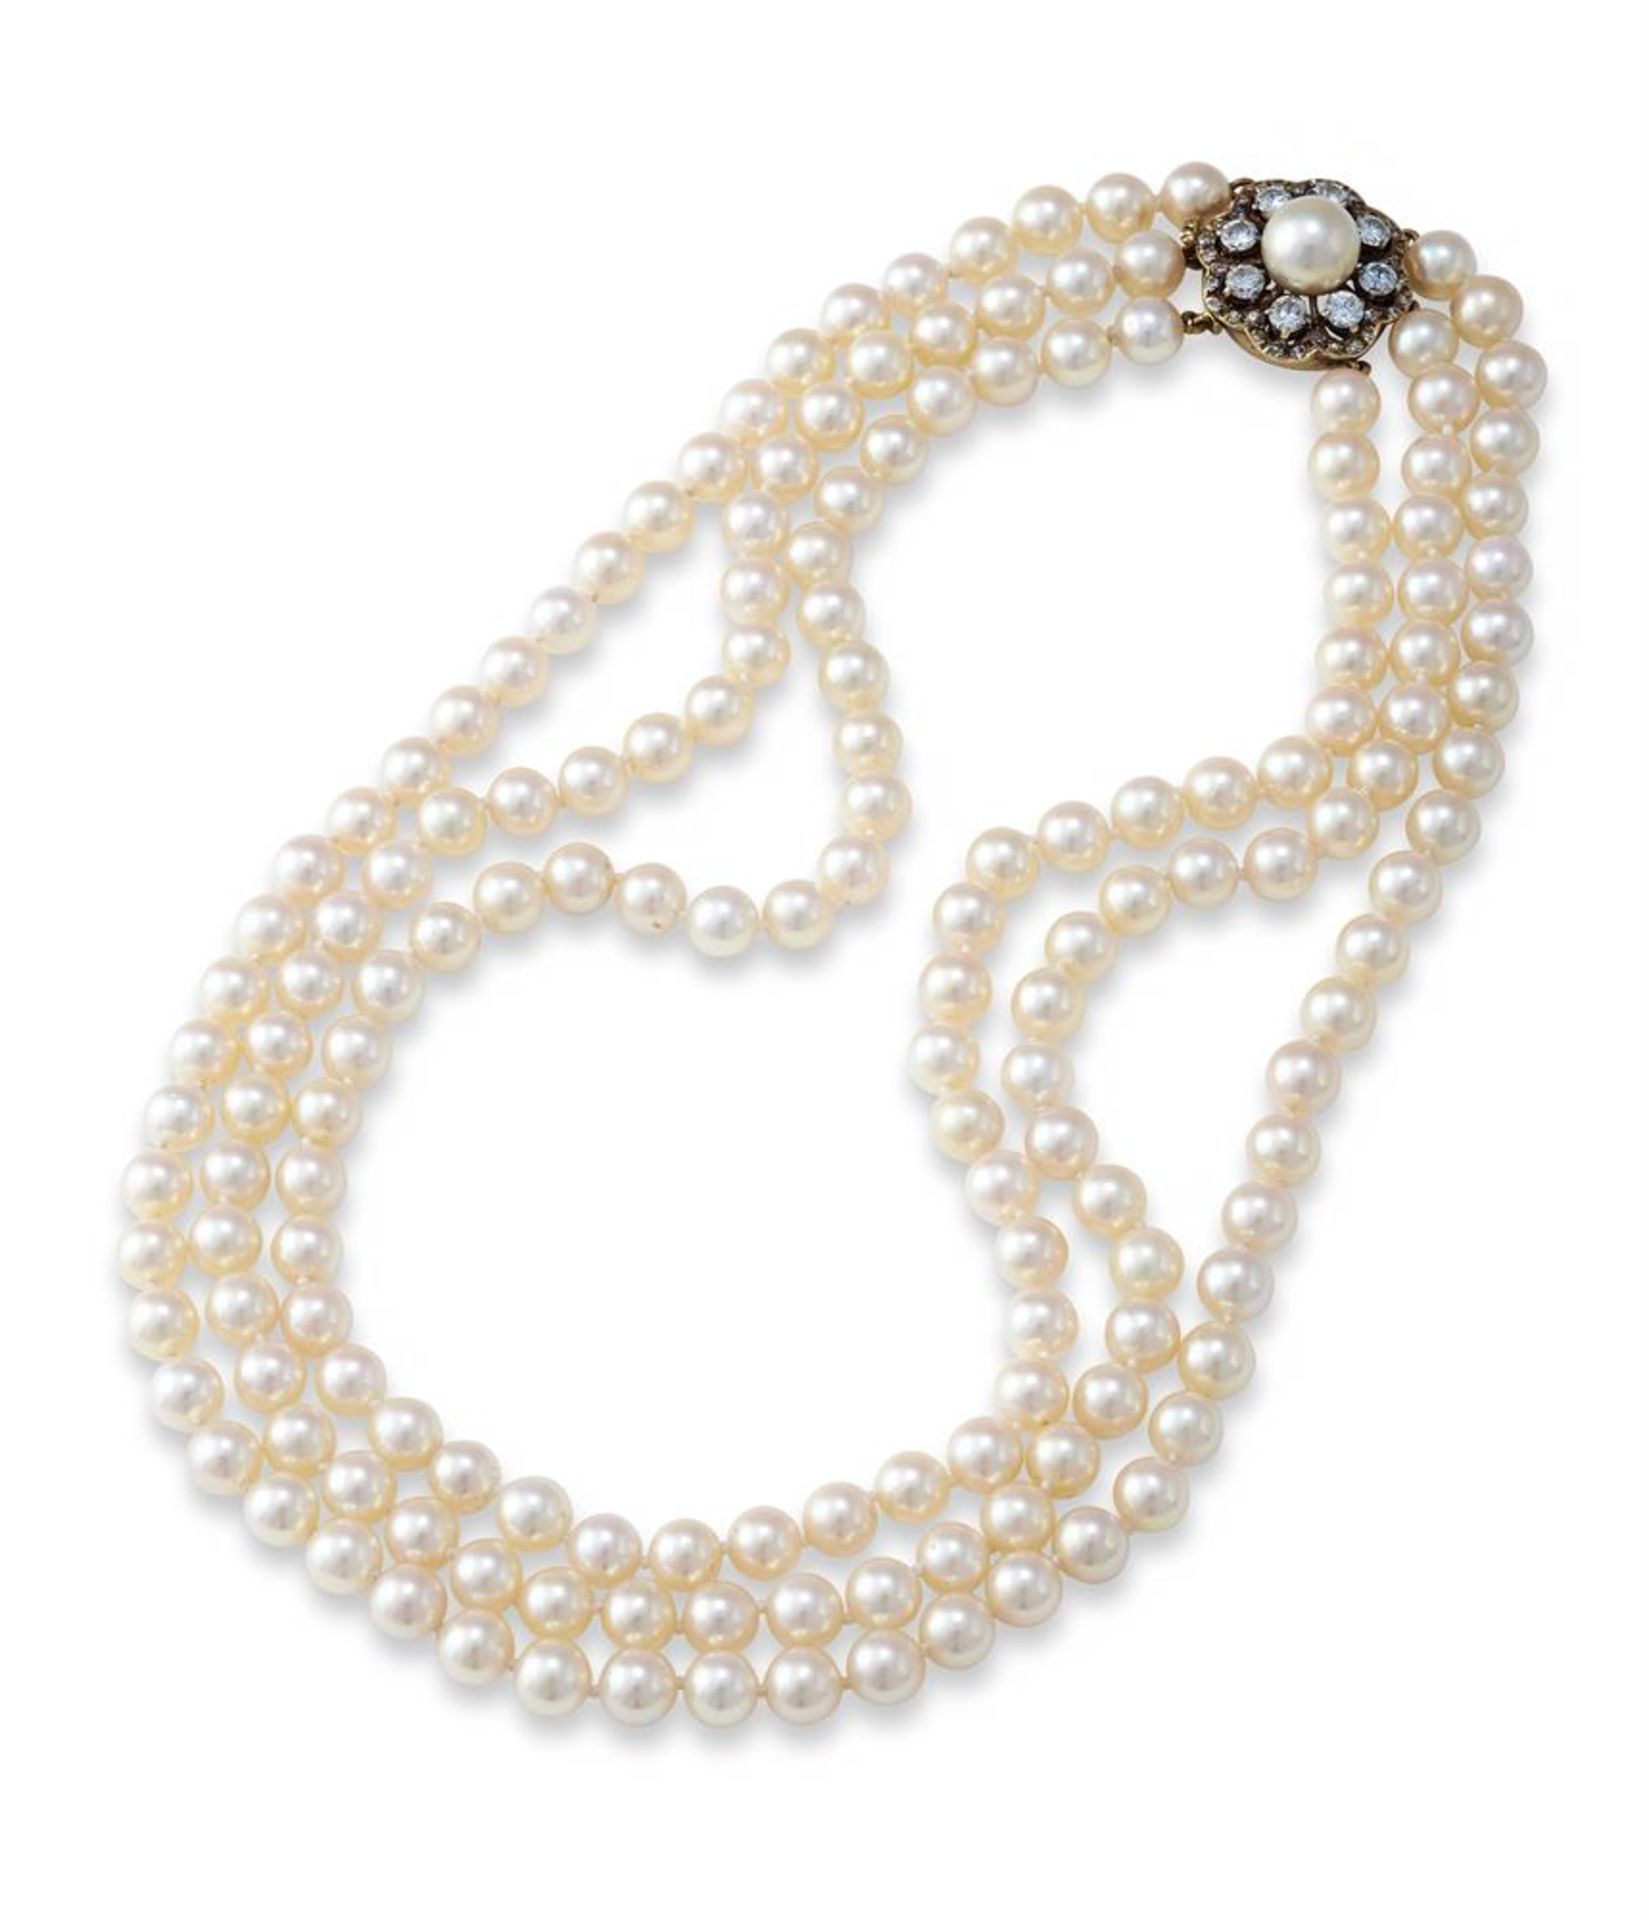 A THREE ROW CULTURED PEARL NECKLACE WITH DIAMOND AND CULTURED PEARL CLUSTER CLASP